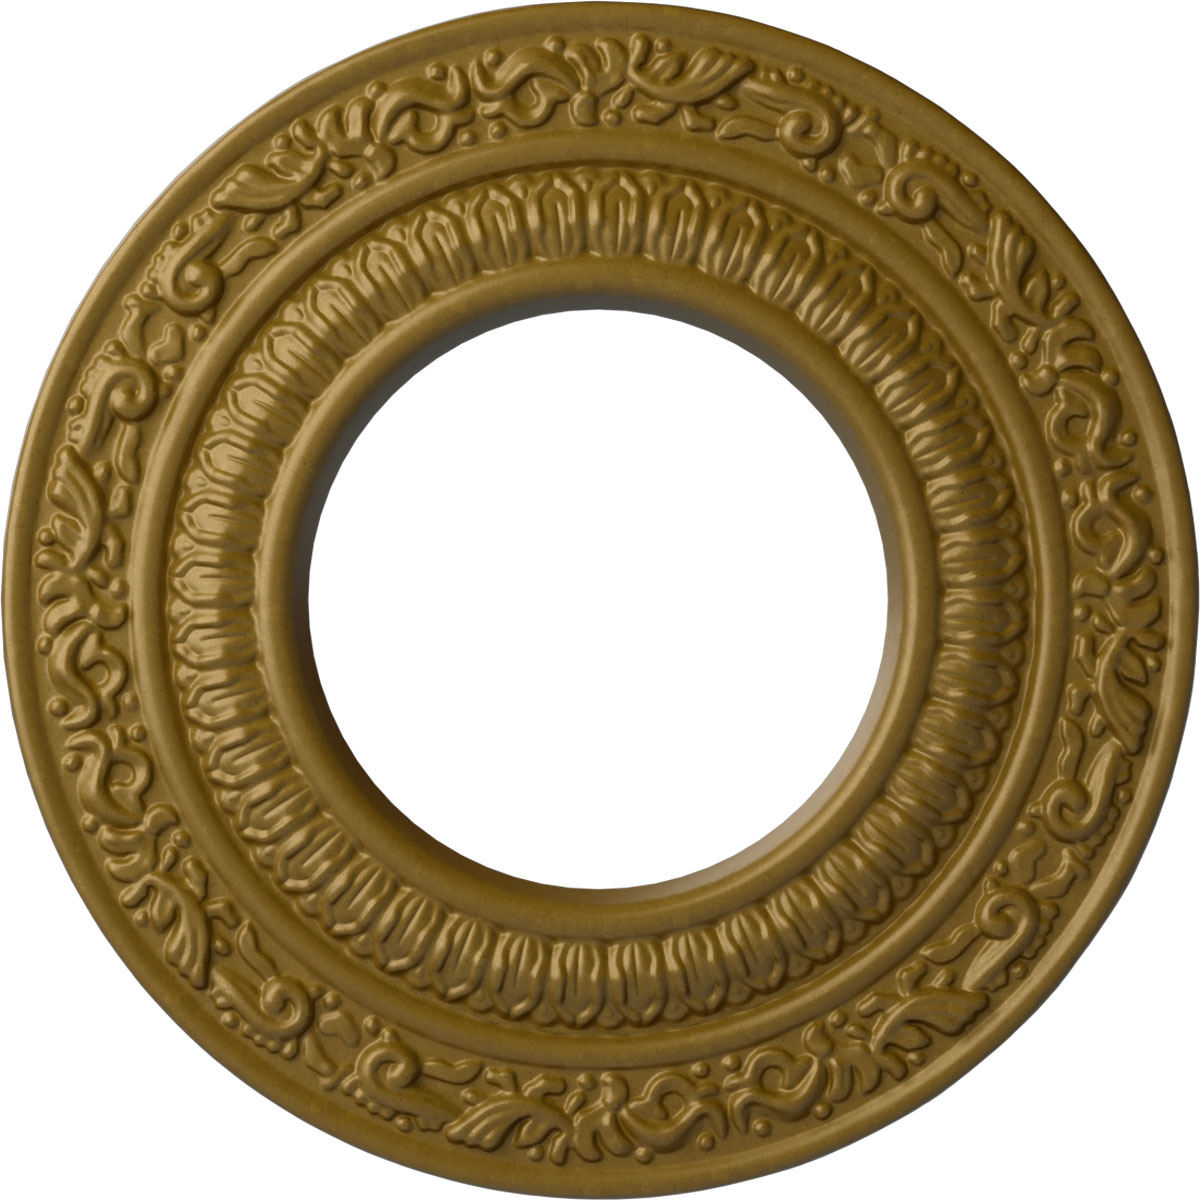 Ekena Millwork 8 1/8"OD x 4 1/8"ID x 1/2"P Andrea Ceiling Medallion (Fits Canopies up to 4 1/8"), Hand-Painted Gold - image 1 of 4